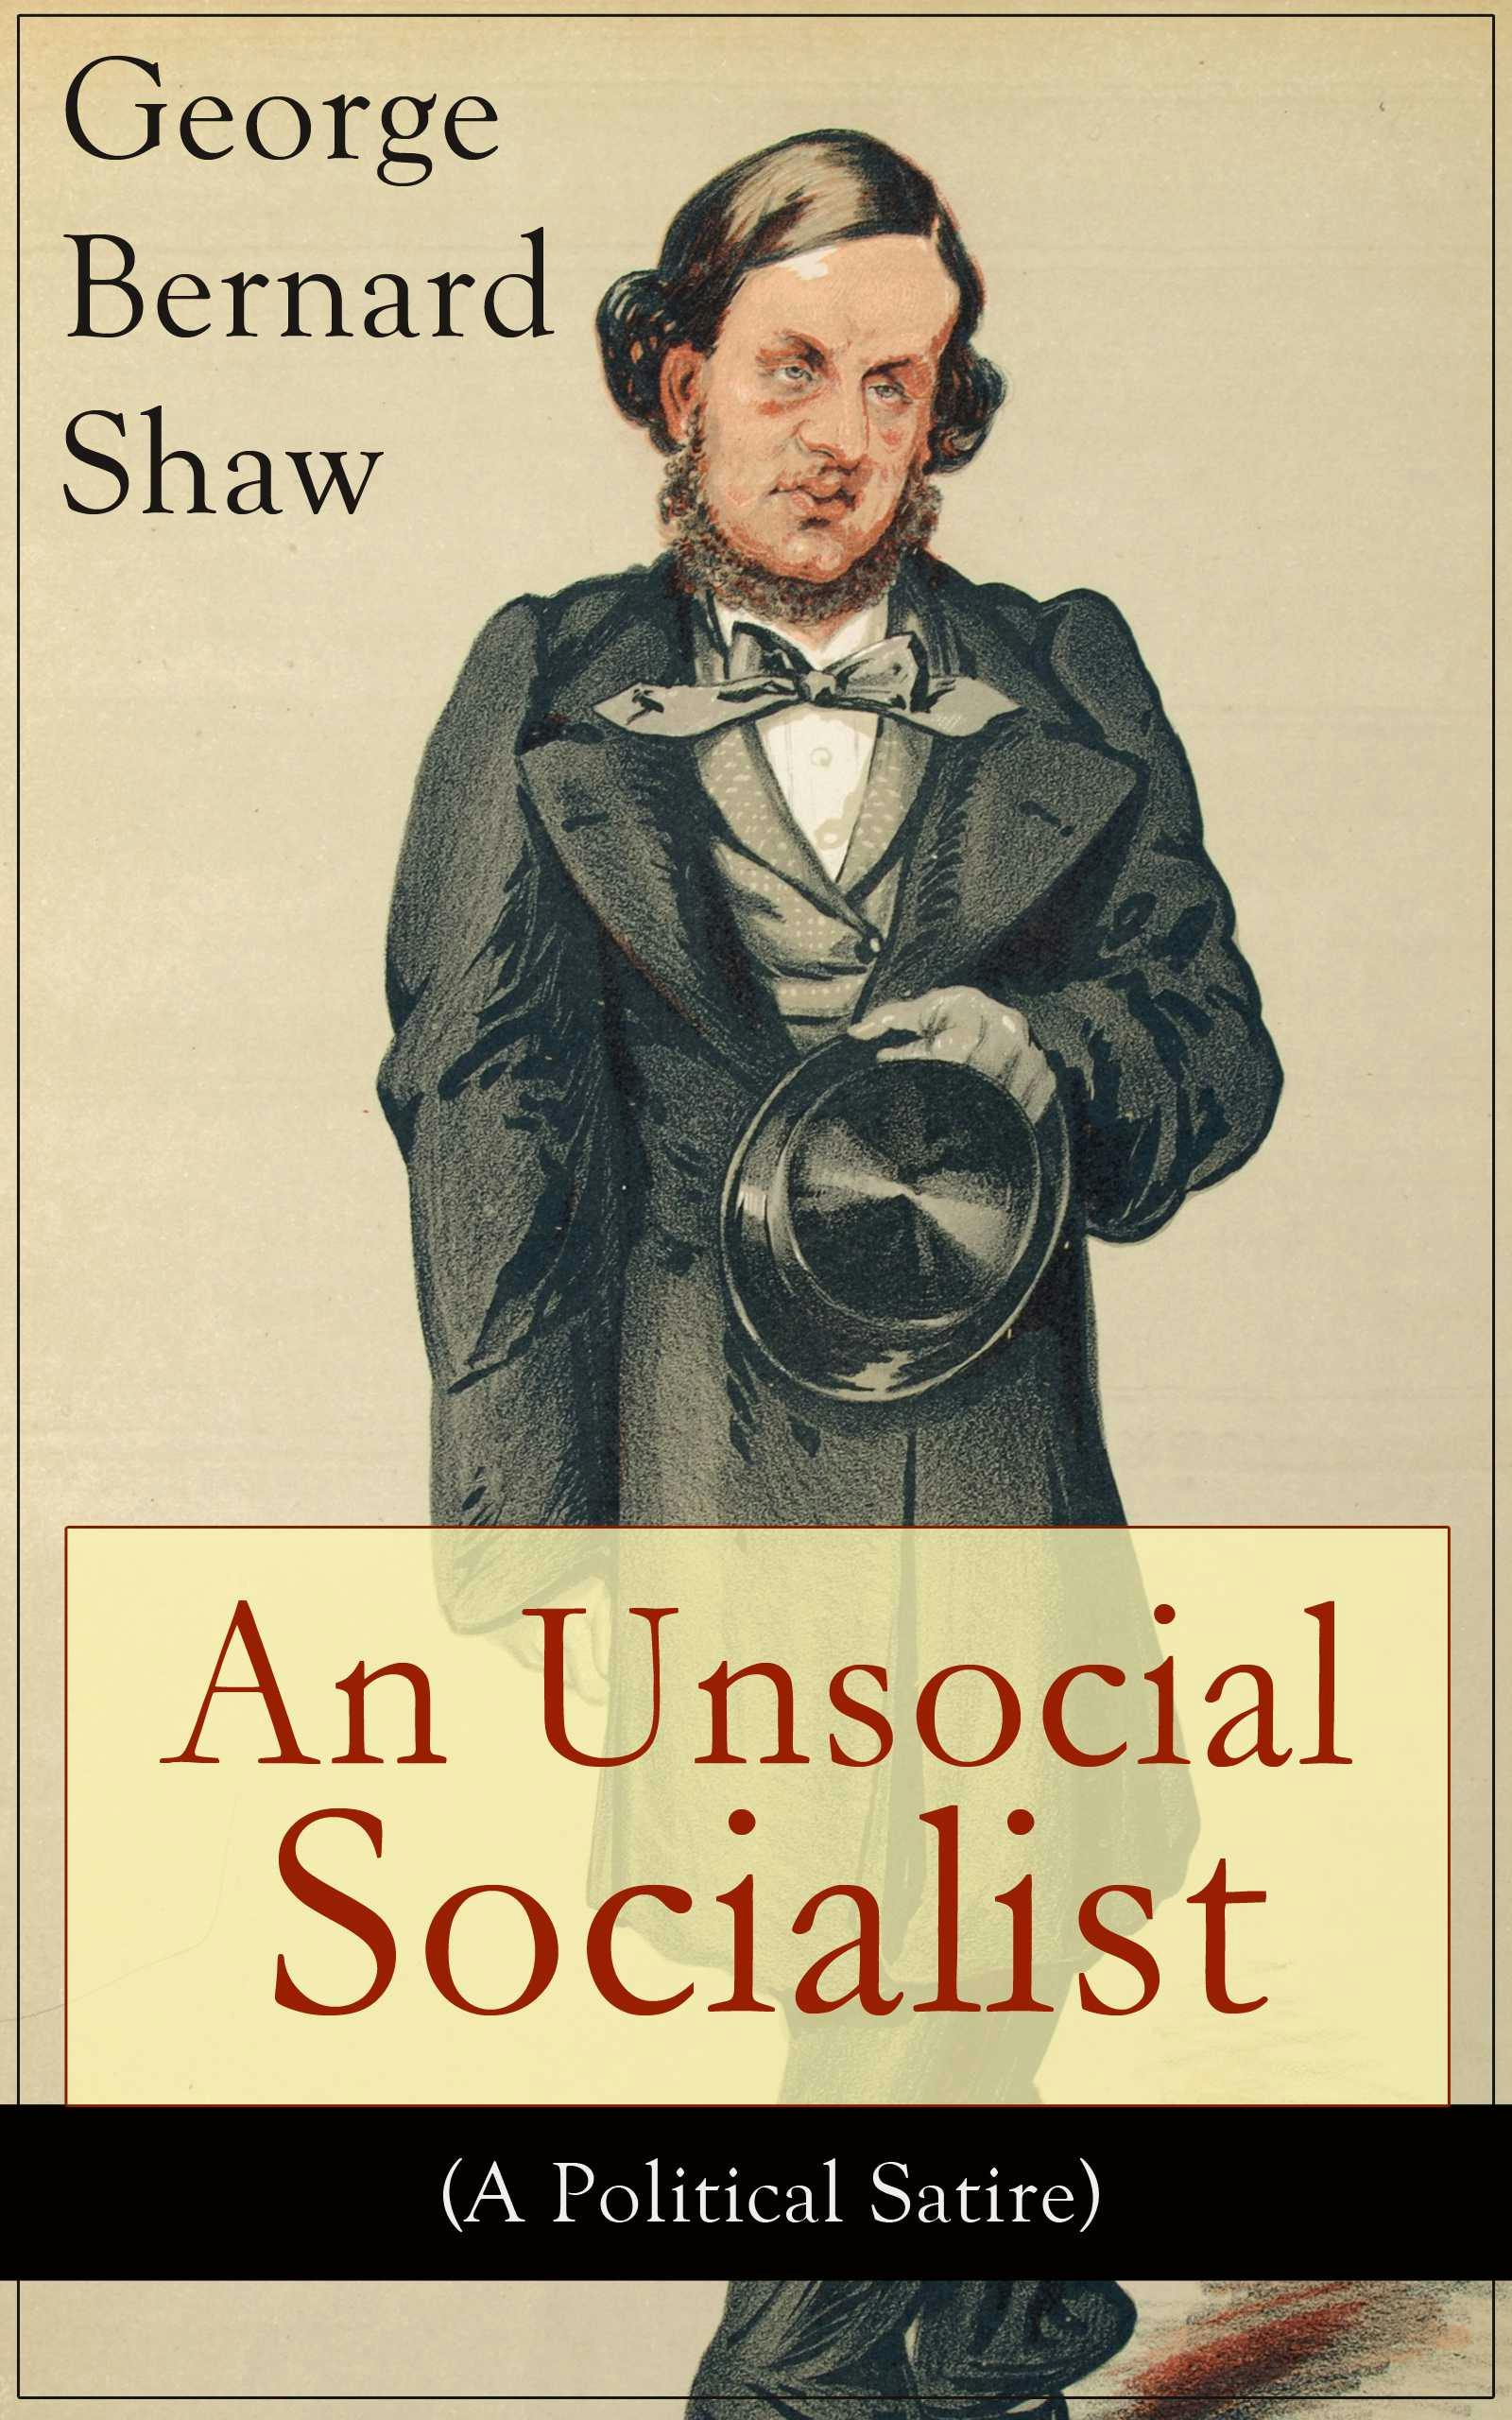 An Unsocial Socialist (A Political Satire): A Humorous Take on Socialism in Contemporary Victorian England From the Renowned Author of Mrs. Warren's Profession, Pygmalion, Arms and The Man, Caesar and Cleopatra, Androcles And The Lion - George Bernard Shaw